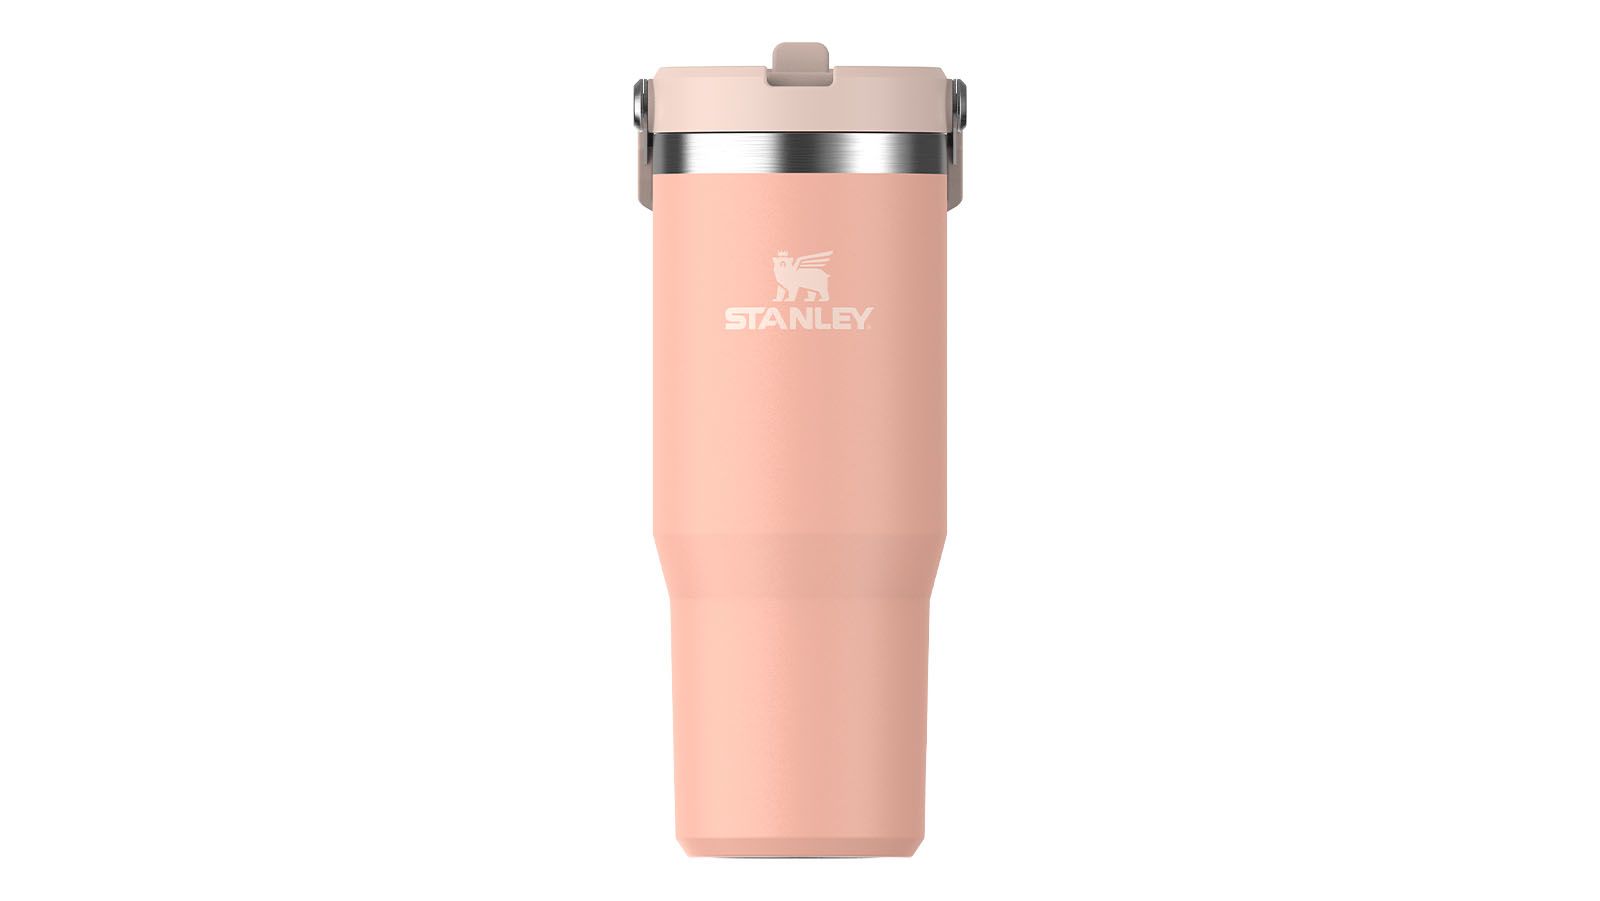 SHIPS TODAY! Stanley Sizzling Pink 30oz Quencher H2.0 New Target